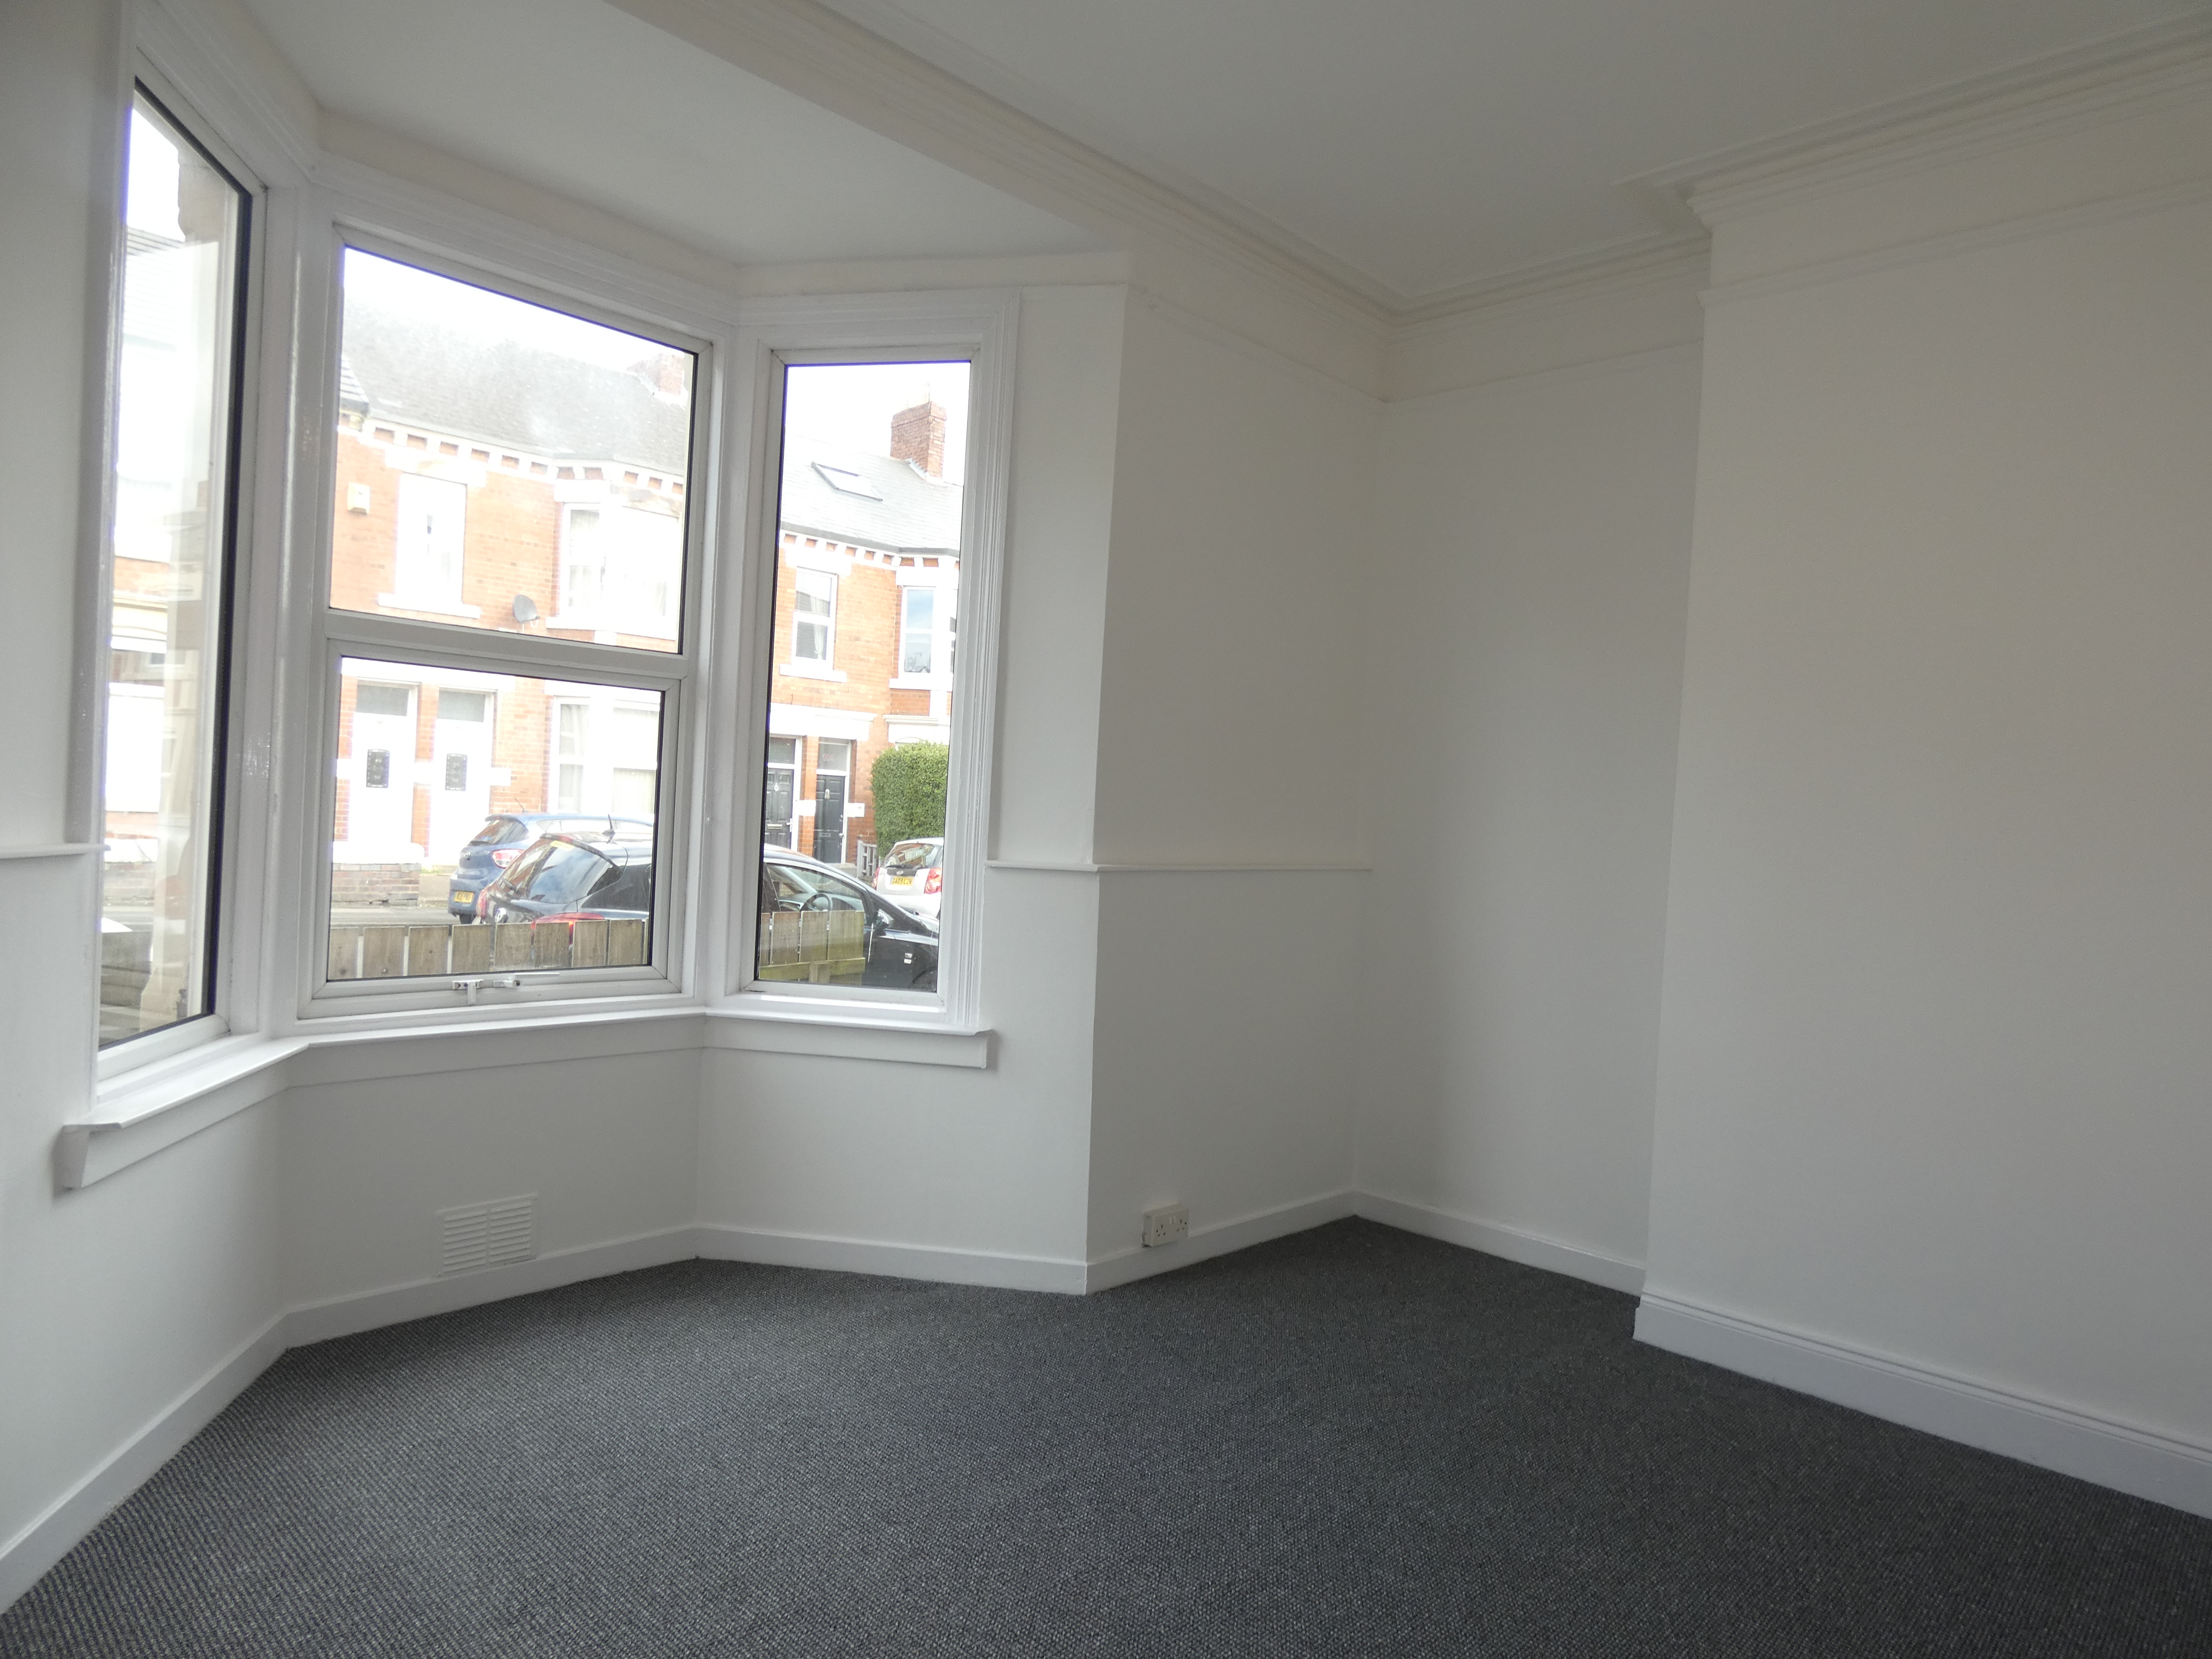 2 bed flat to rent in Trewhitt Road, Newcastle upon tyne  - Property Image 1